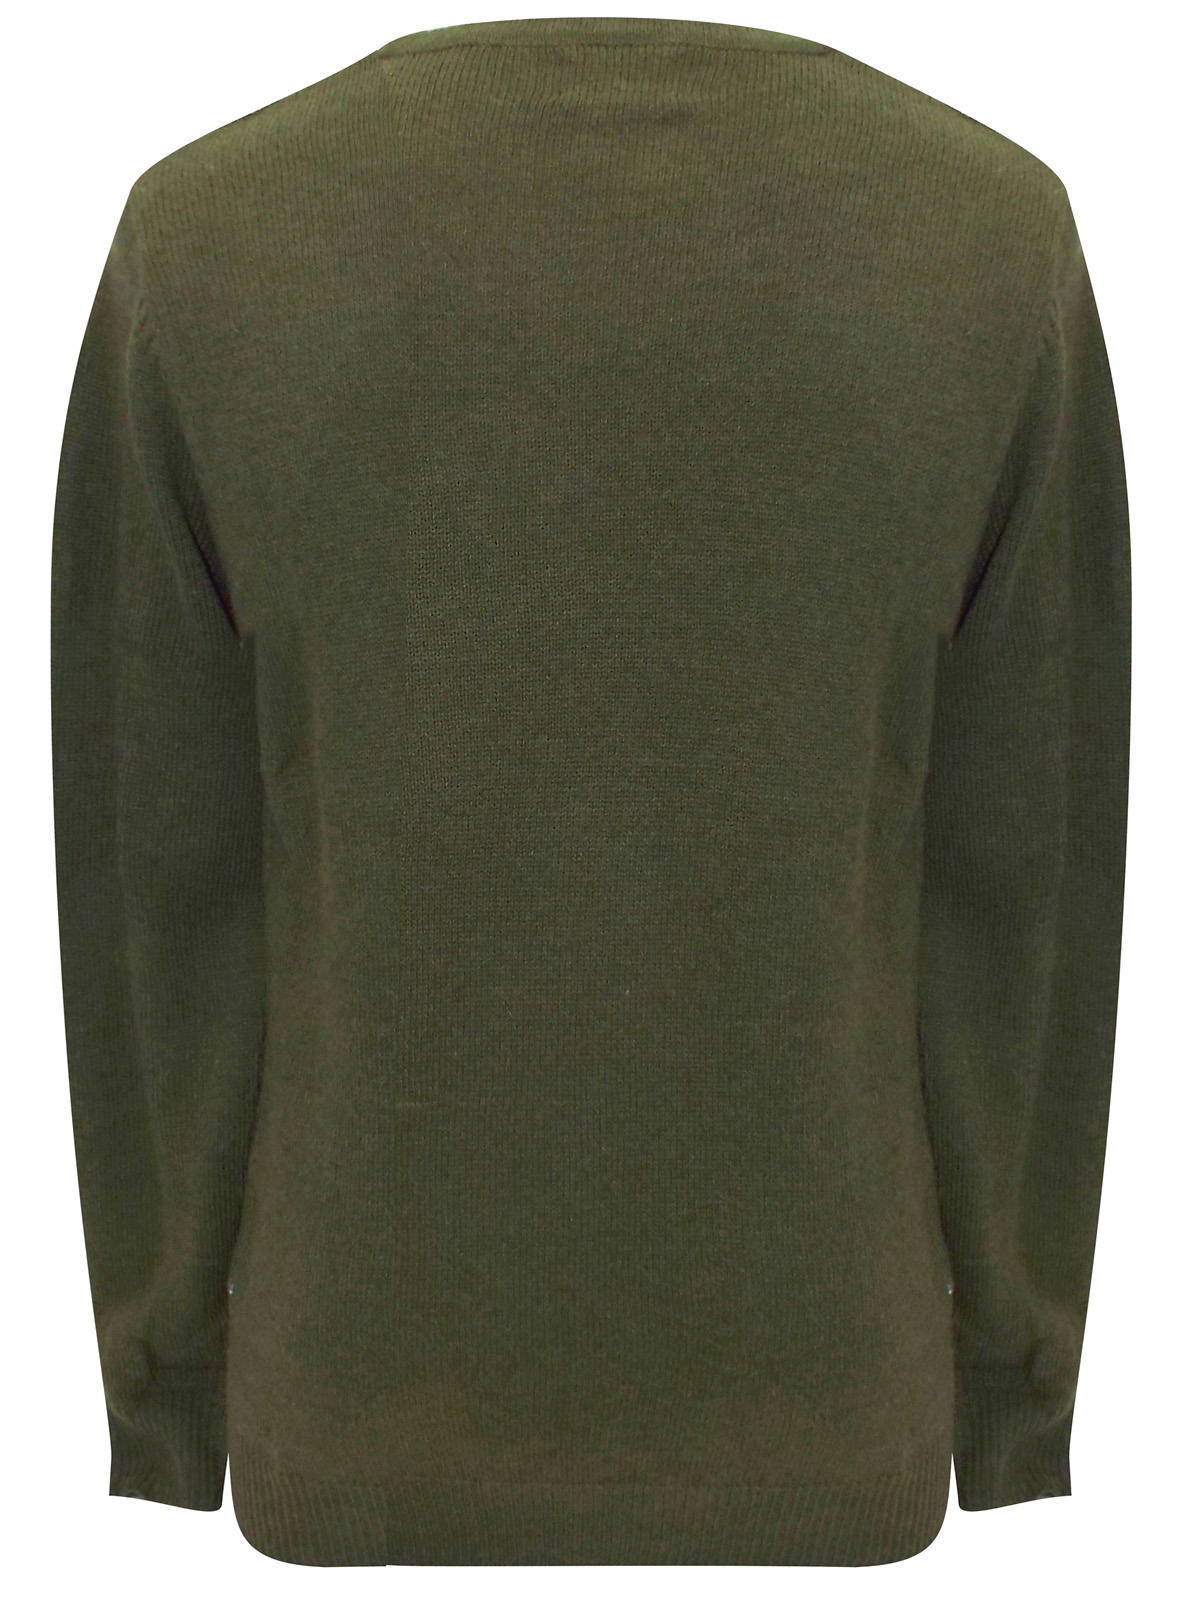 n3xt-sage-crew-neck-fine-knit-jumper-with-wool-size-small-to-medium